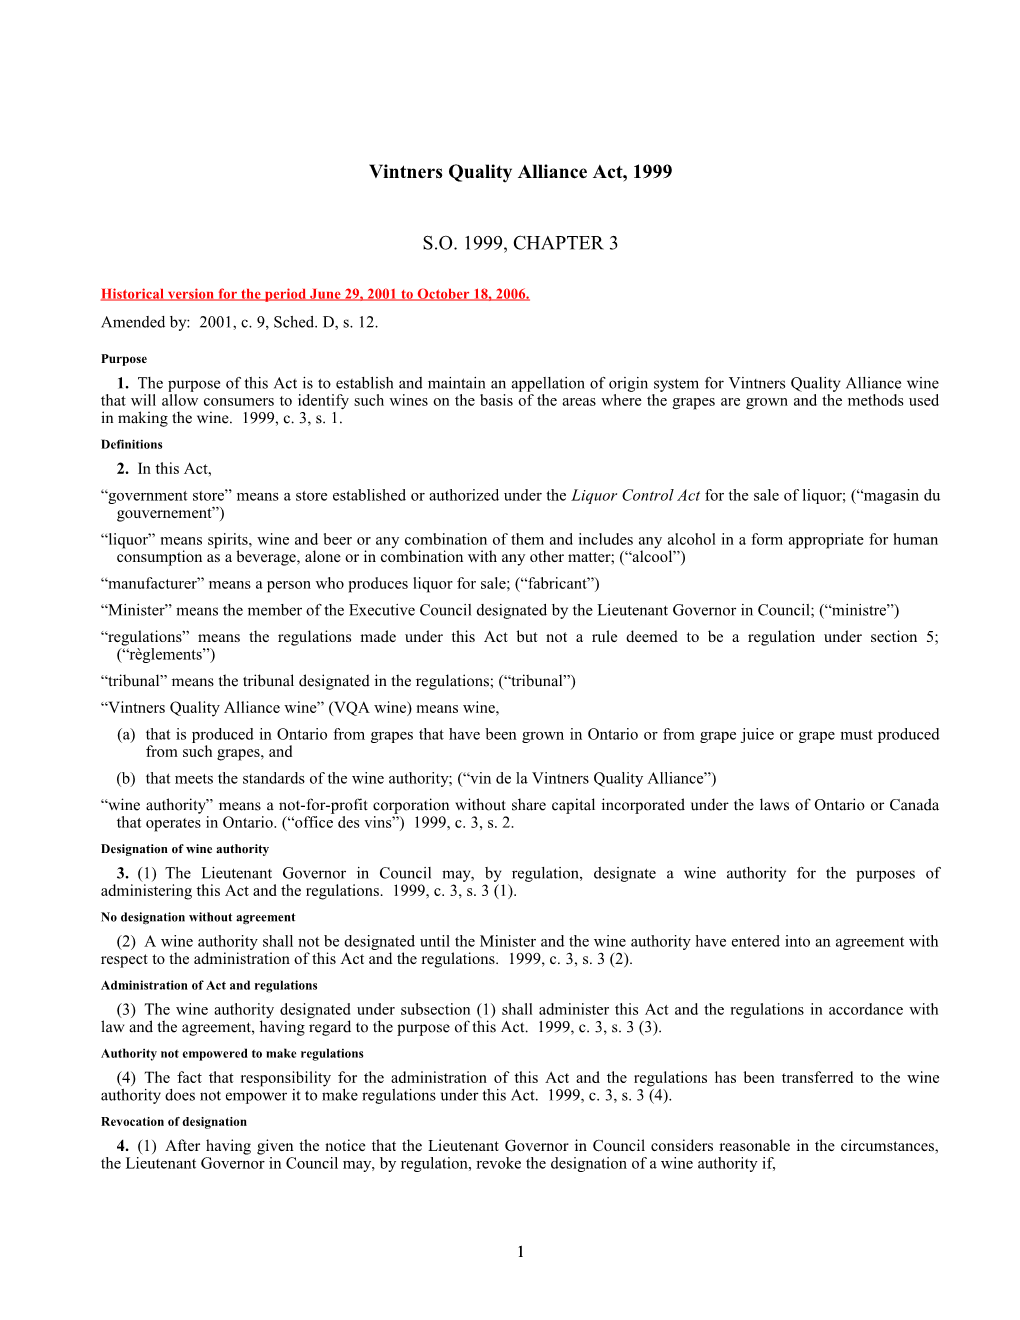 Vintners Quality Alliance Act, 1999, S.O. 1999, C. 3